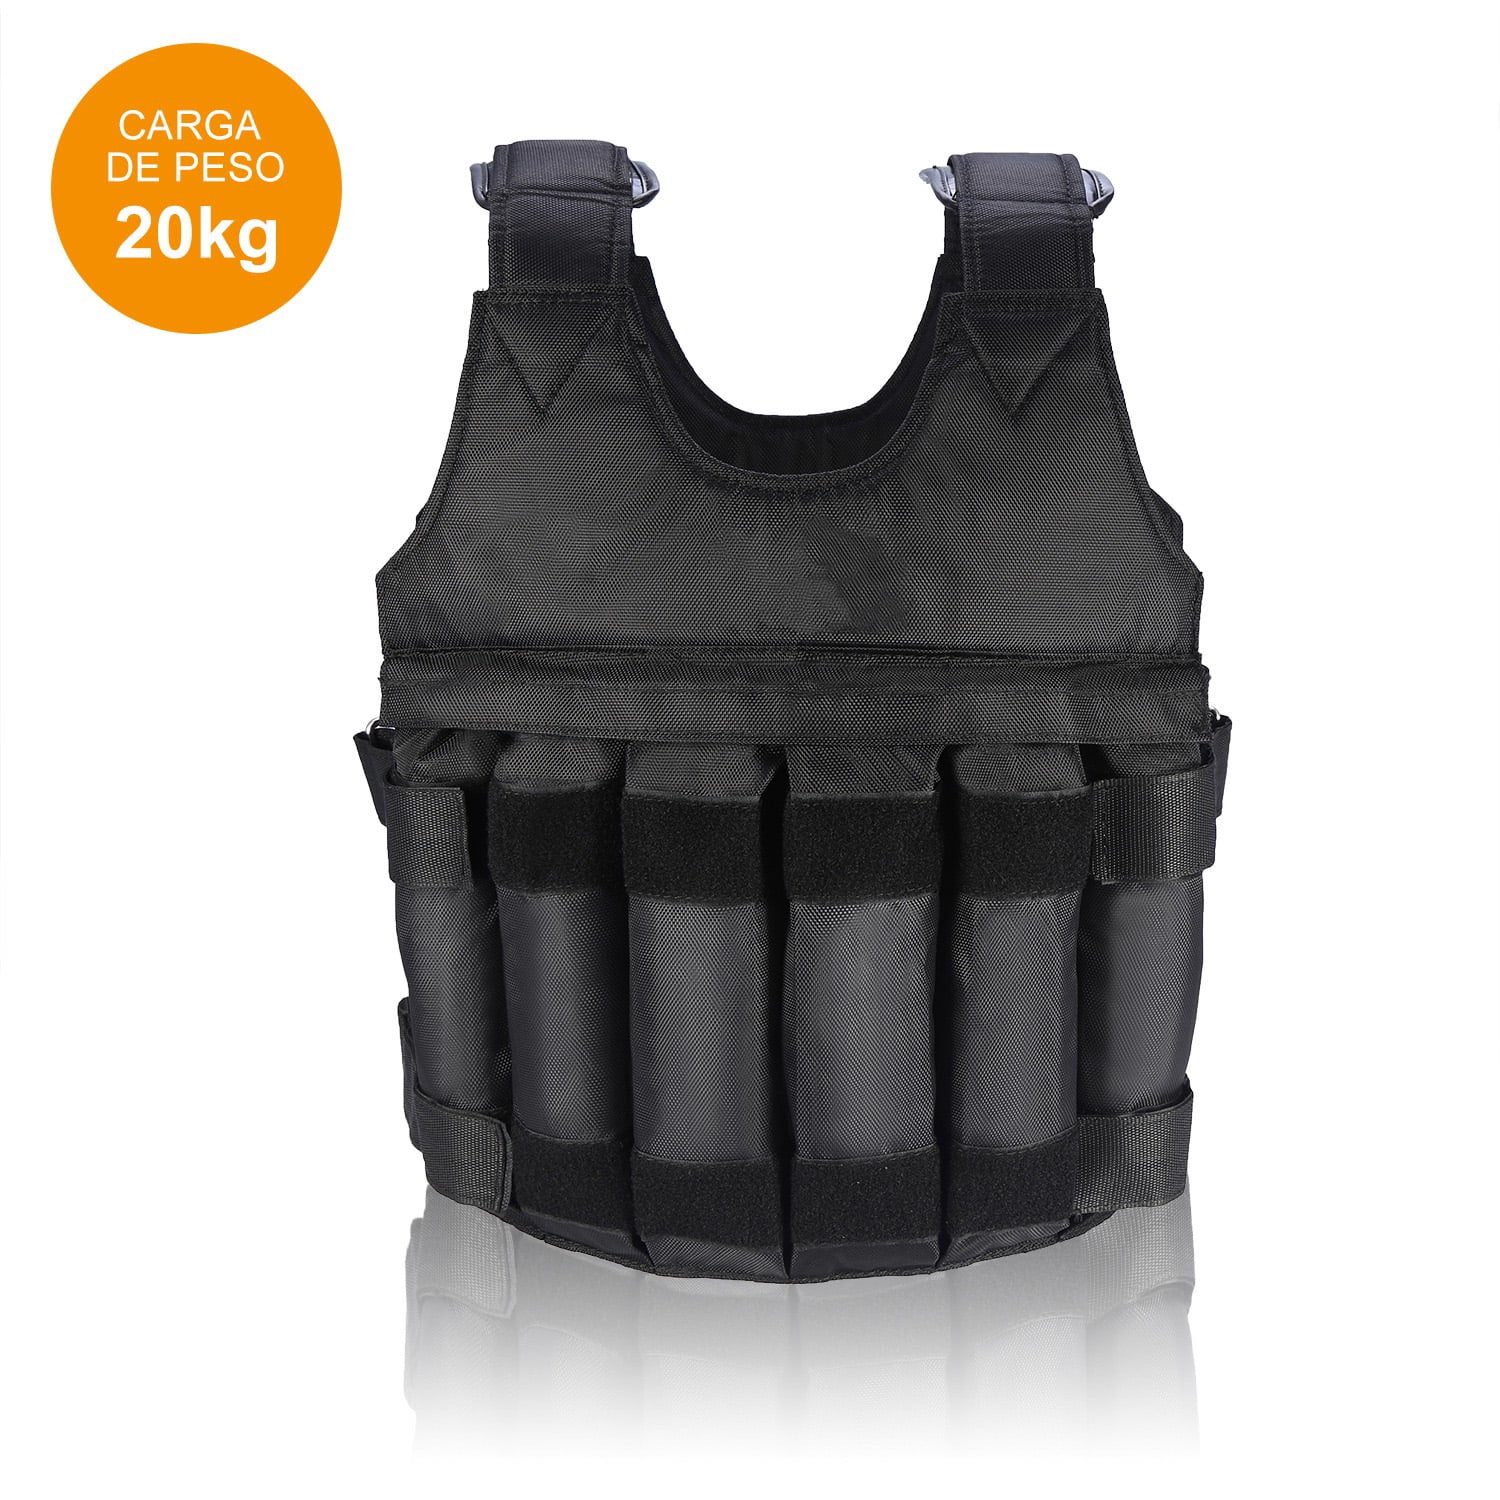 Weight Vest Boxing Training Adjustable Running Exercise Crossfit Loading Weight 